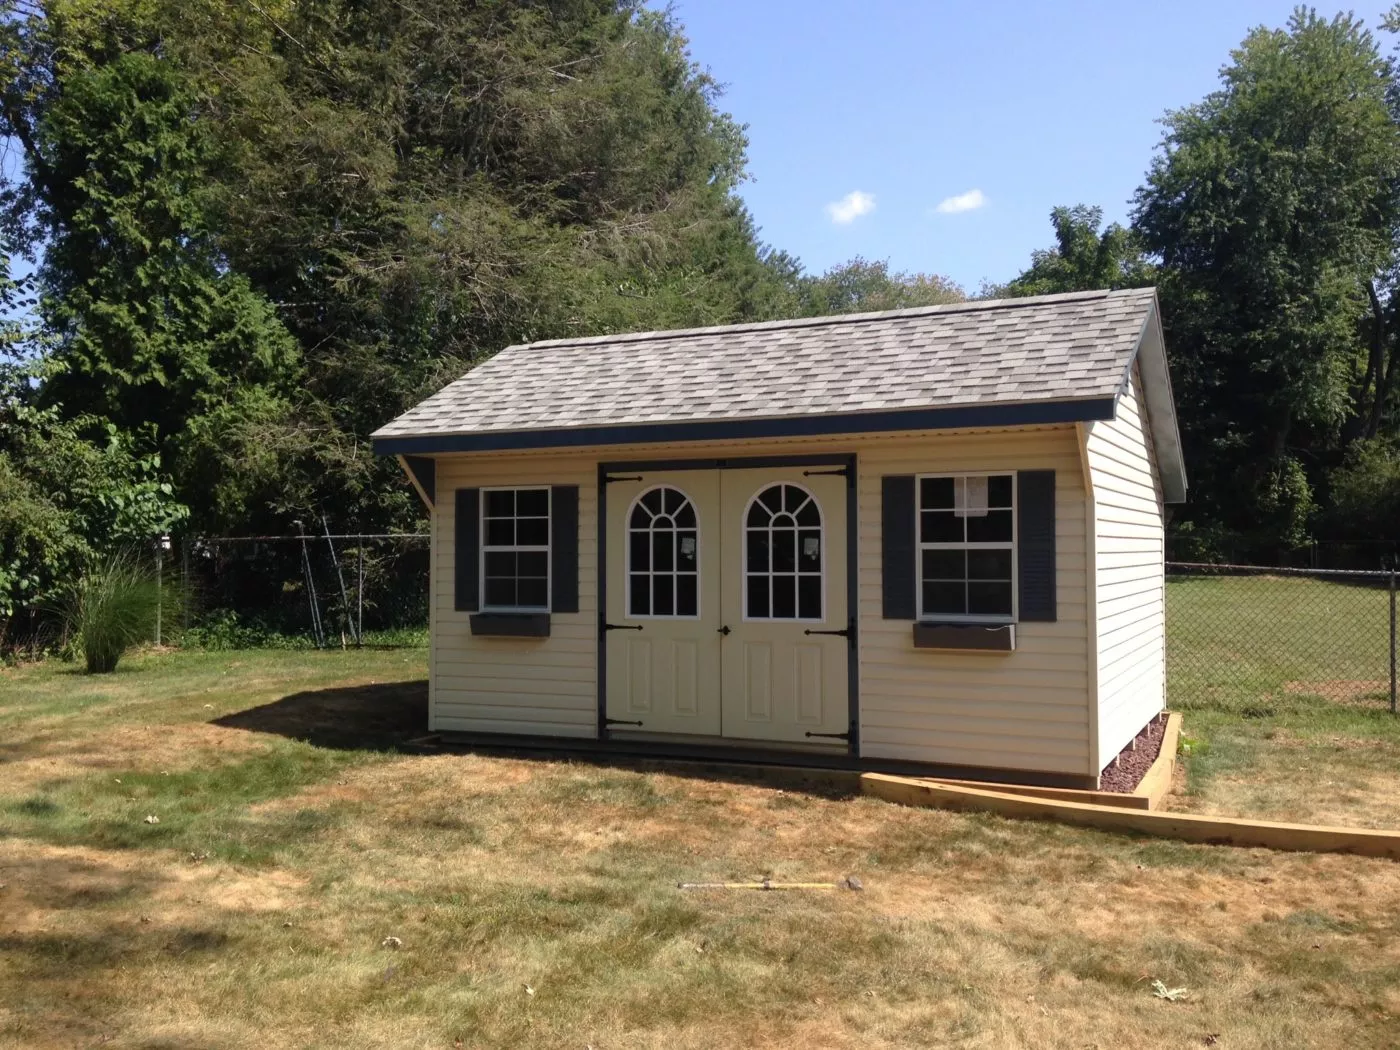 sheds for sale in ny